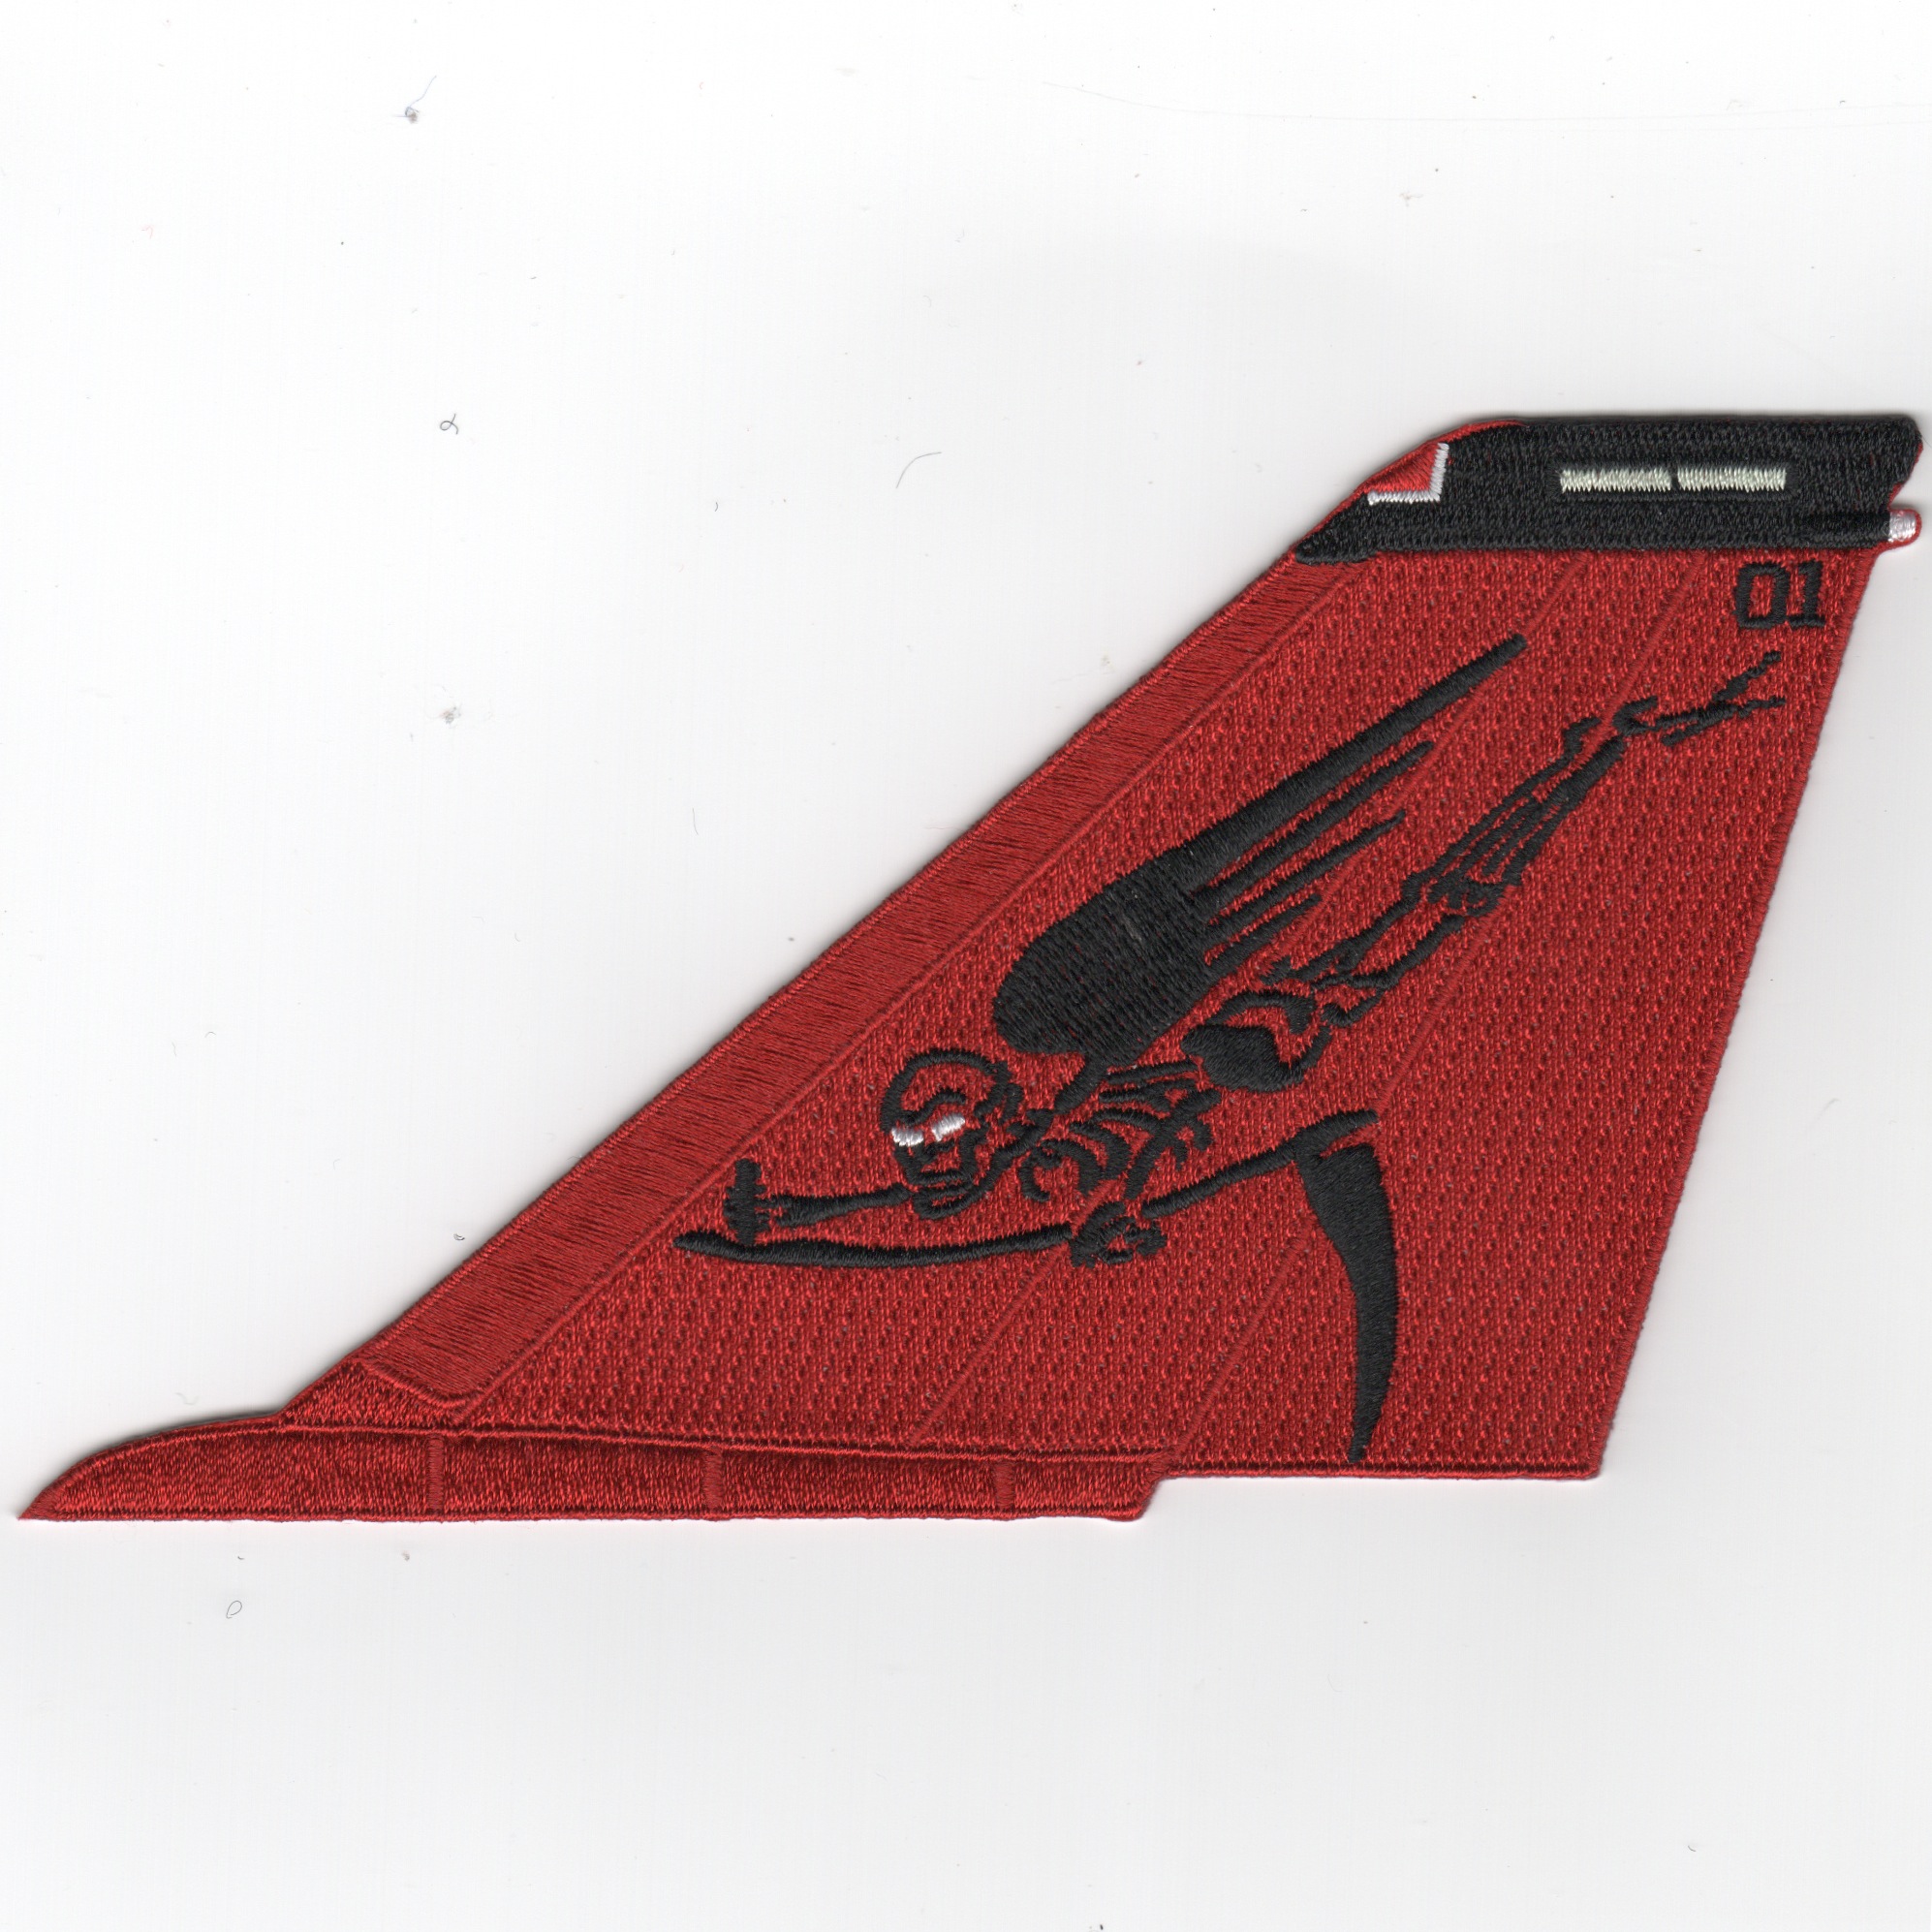 VF-101 F-14 Tail (All Red/Flying Moe/No Text)